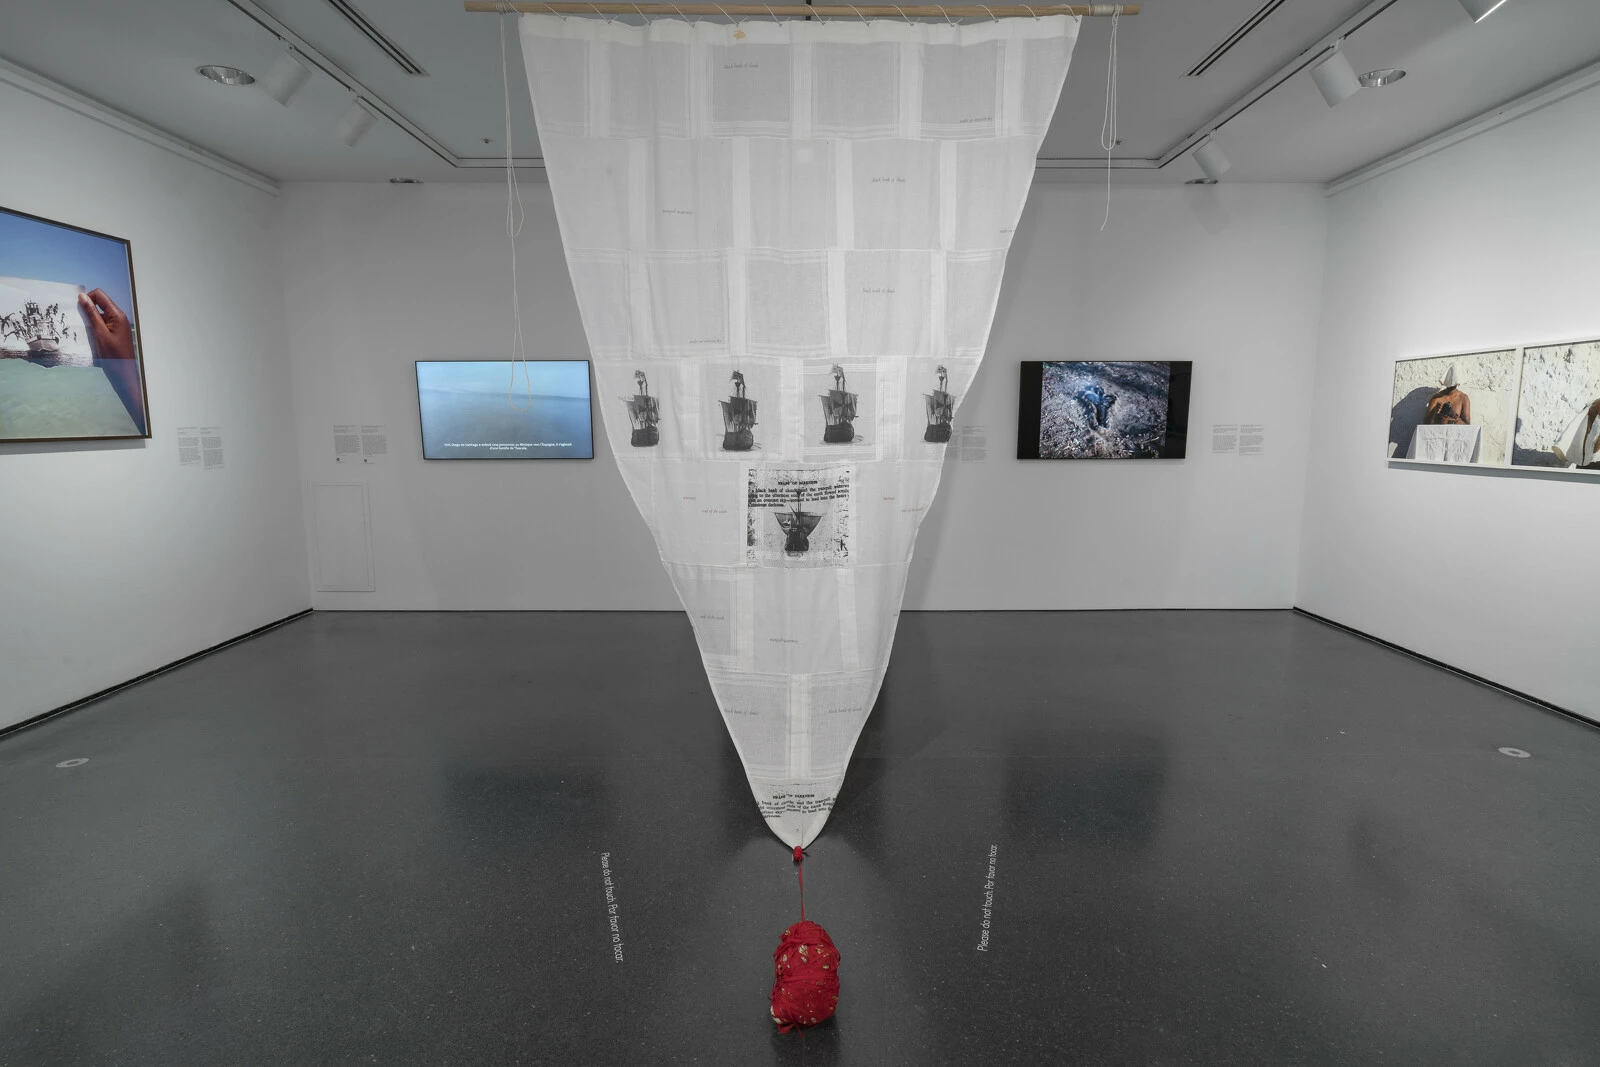 Gallery with several photographs, videos, and other artworks on the wall. In the center a sail-like object hangs from the ceiling.